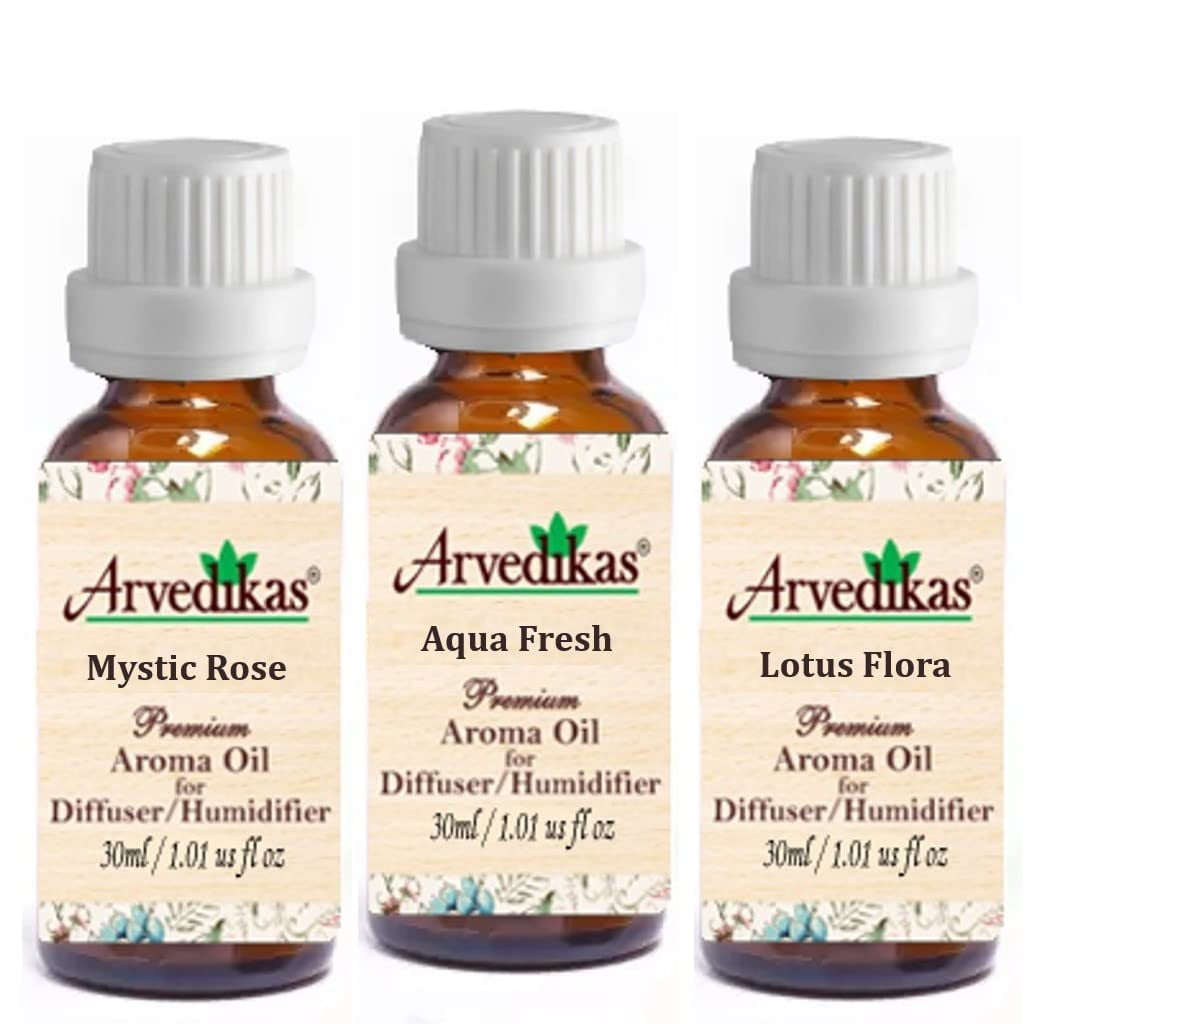 Arvedikas Premium Fragrance Oil for Diffuser/Humidifier | Aroma Oil | Diffuser Oil for Home Fragrance | Electric Diffuser Oil-100ml Each (Lotus 